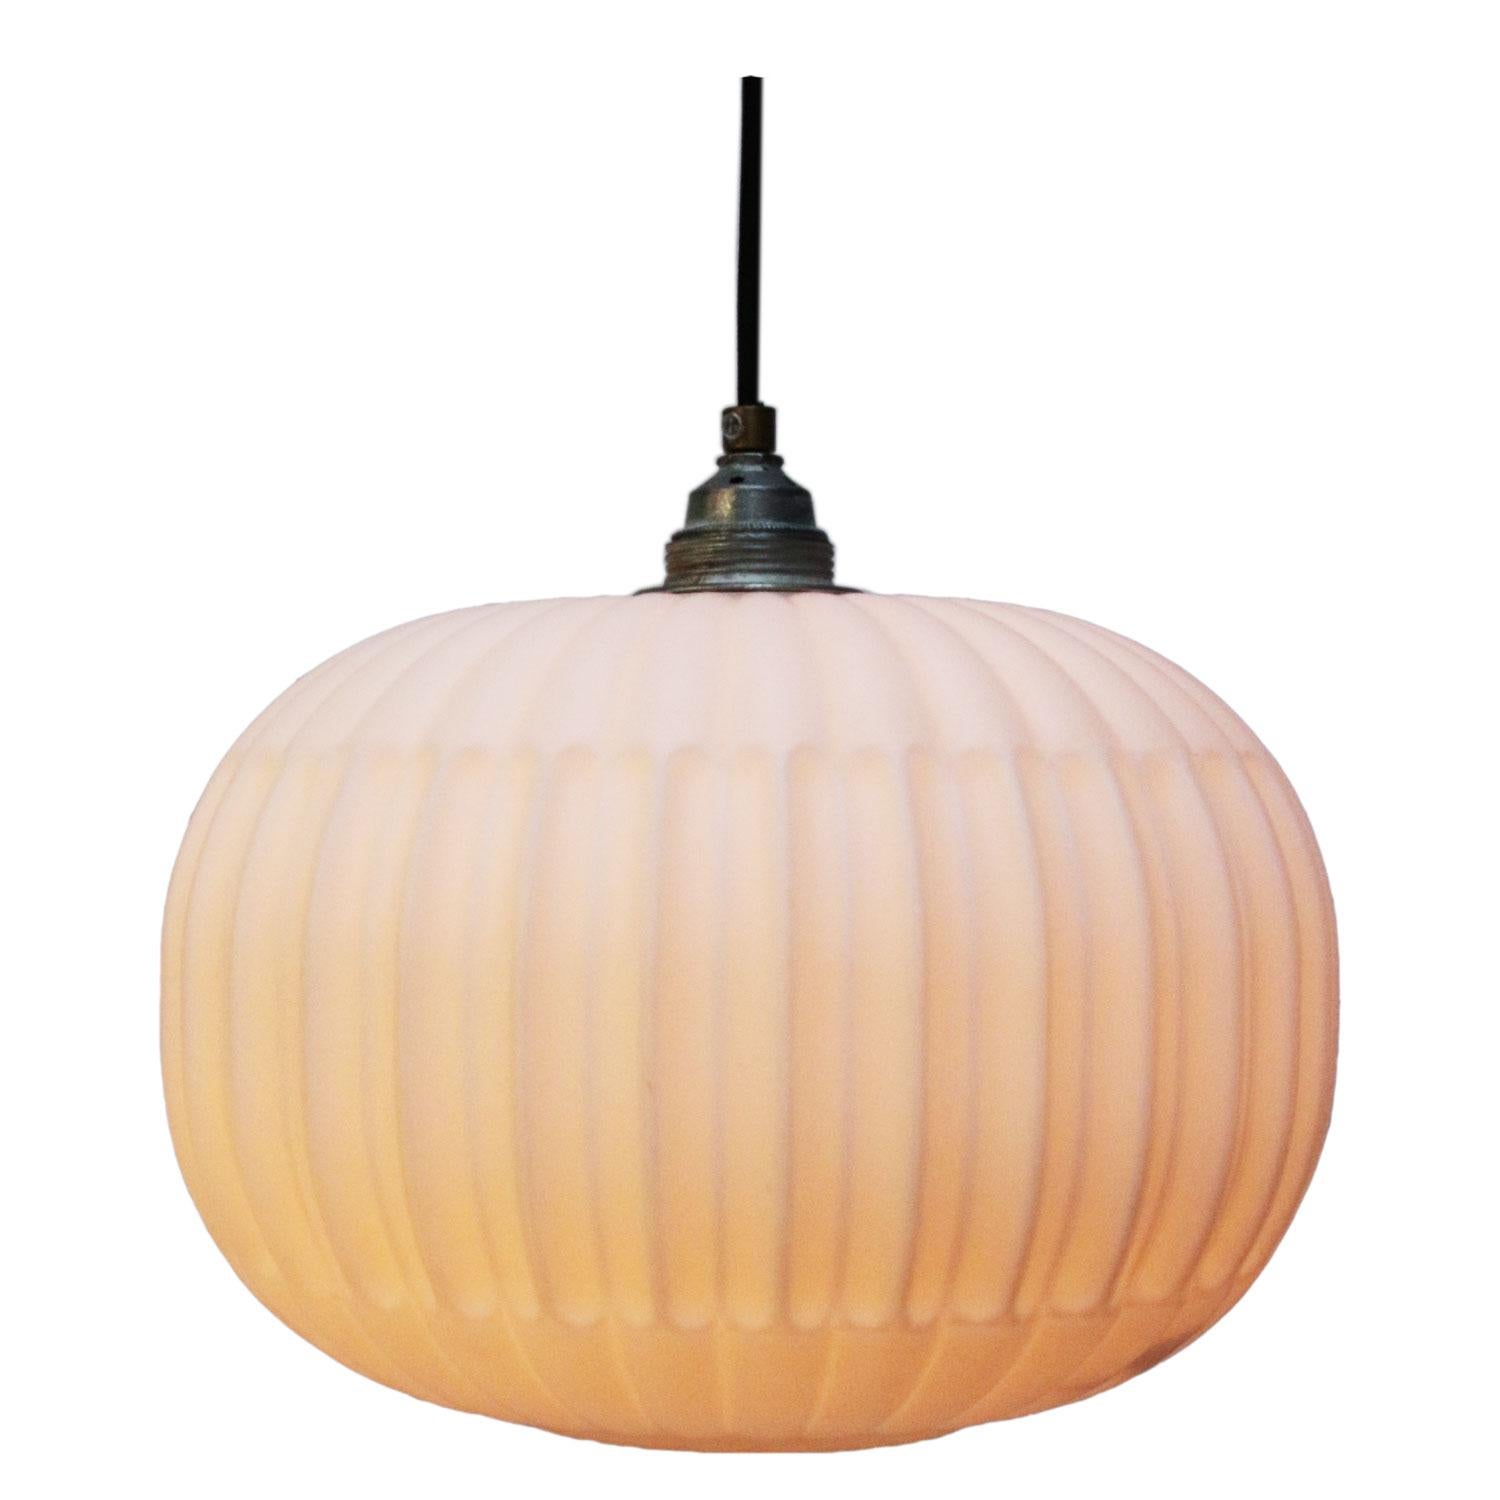 Czech opale glass Industrial pendant. 

Measure: Weight 1.7 kg / 3.7 lb

All lamps have been made suitable by international standards for incandescent light bulbs, energy-efficient and LED bulbs. E26/E27 bulb holders and new wiring are CE